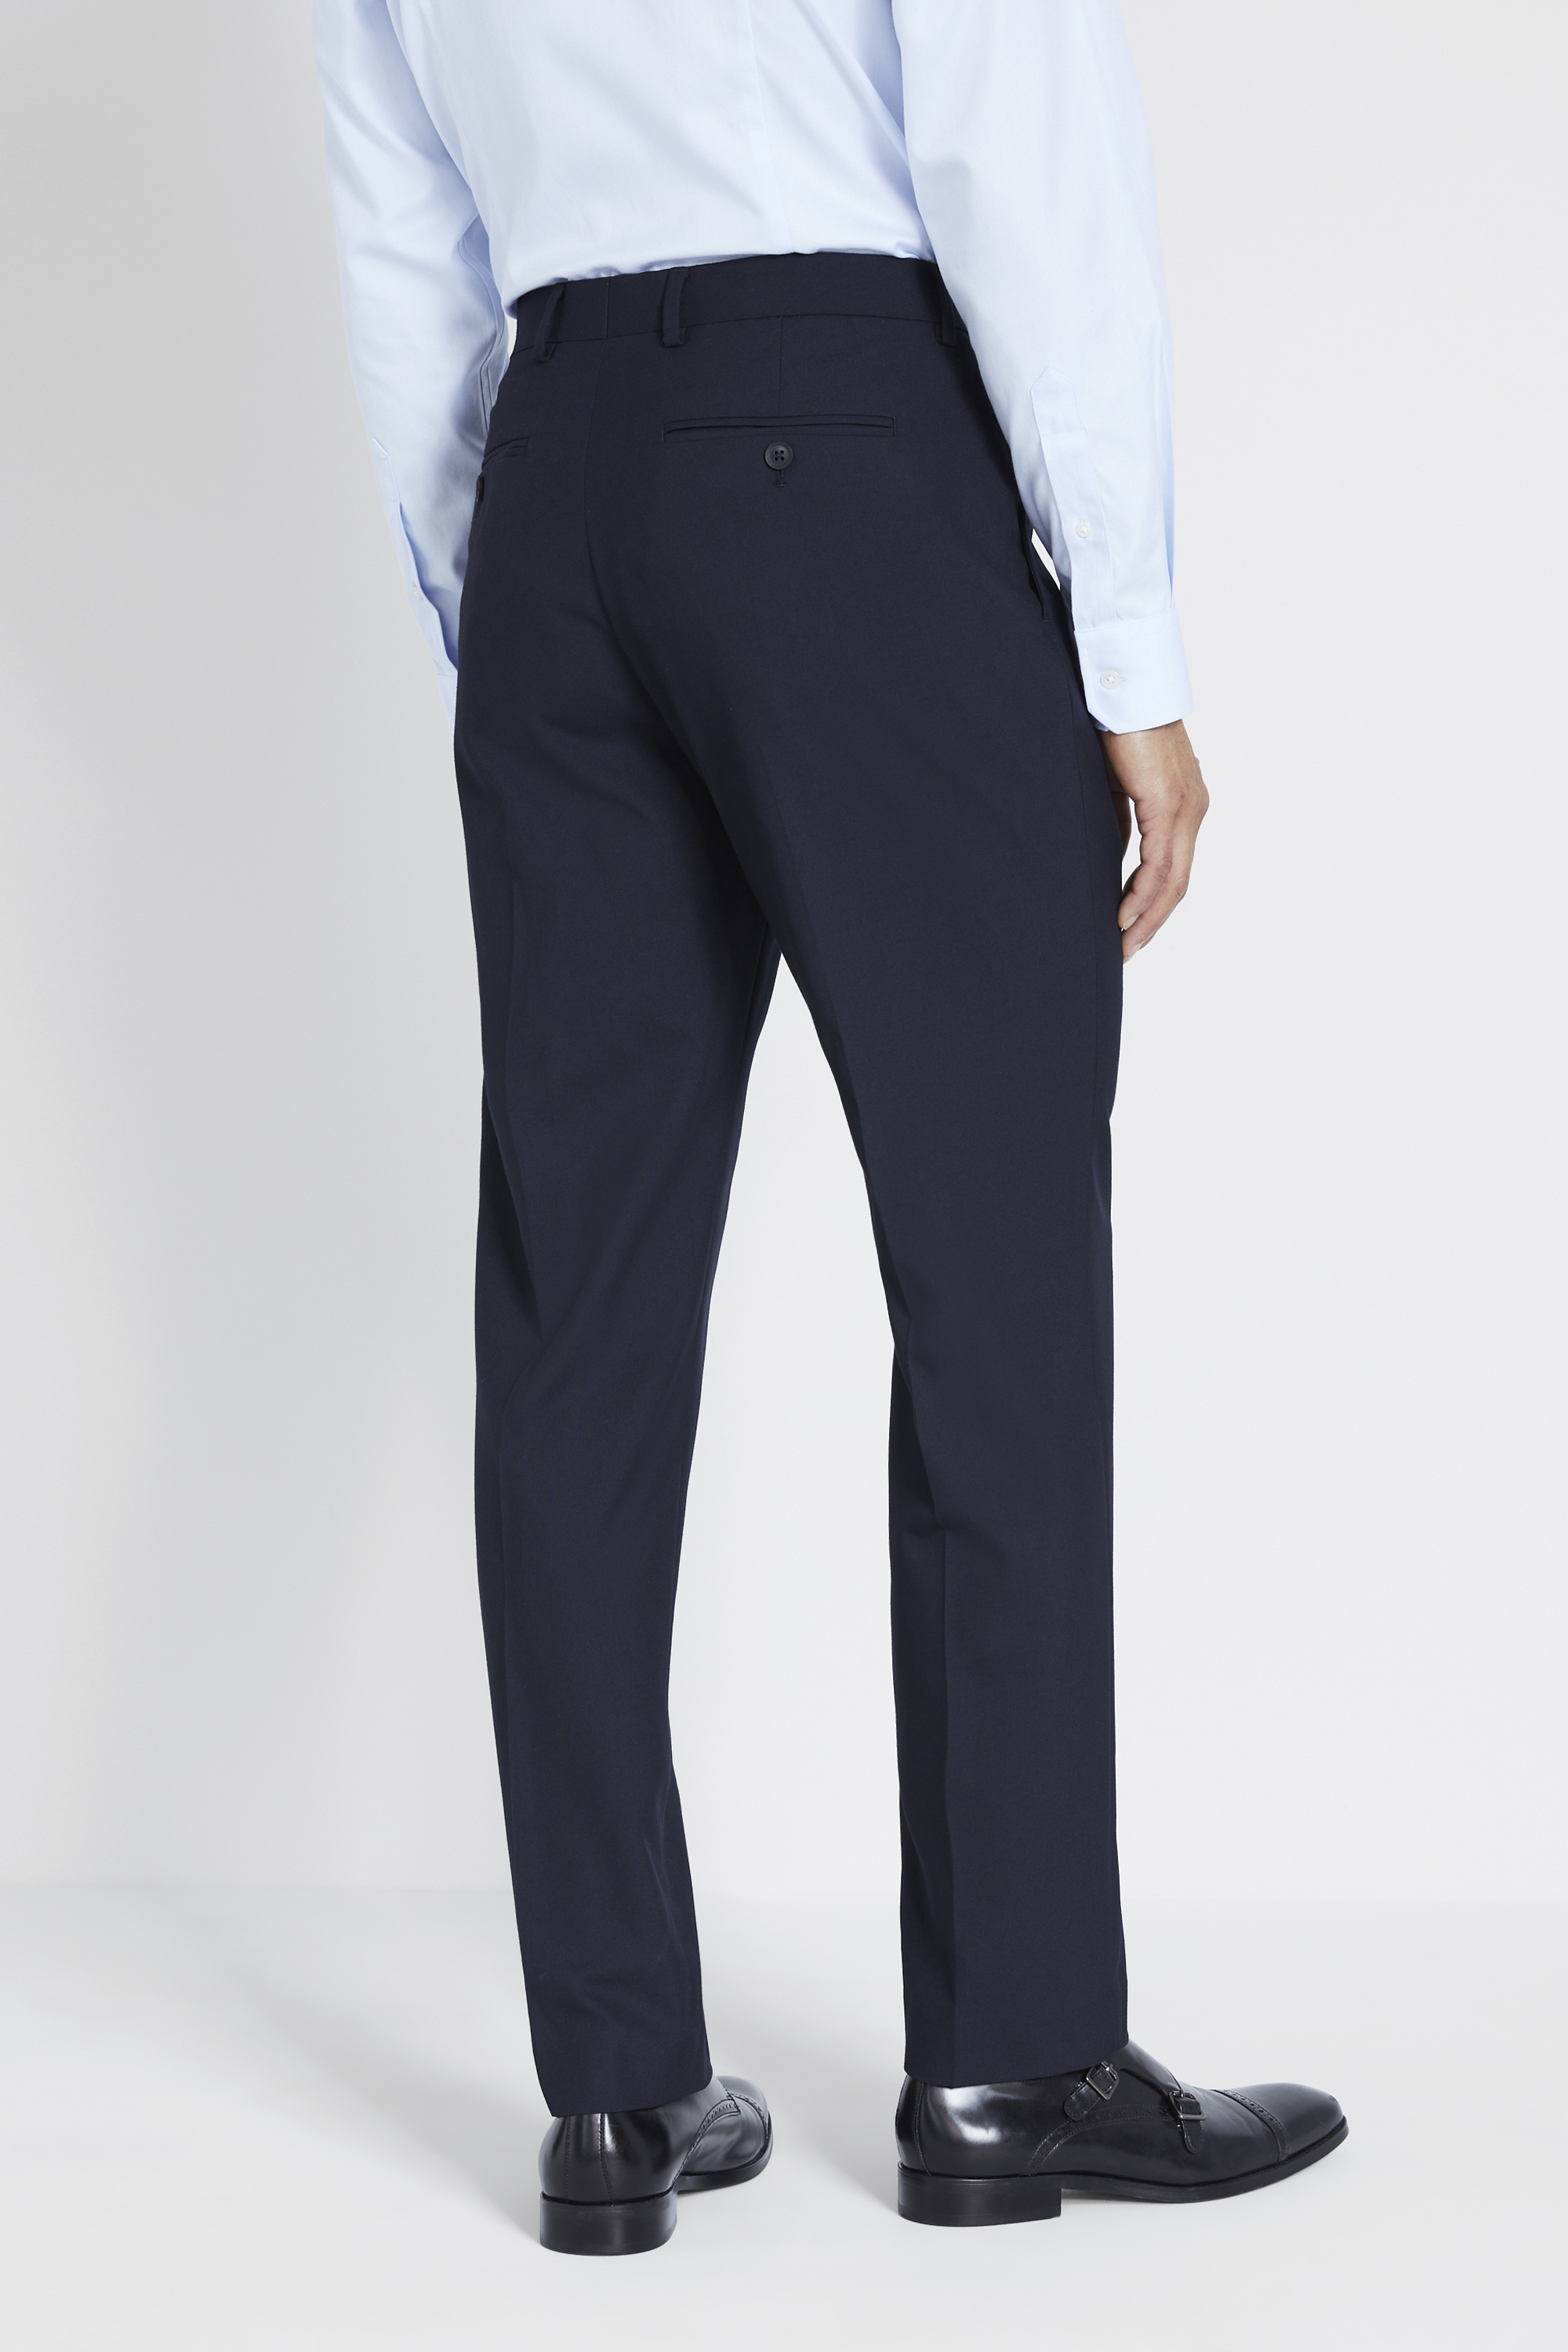 Regular Fit Navy Trousers | Buy Online at Moss